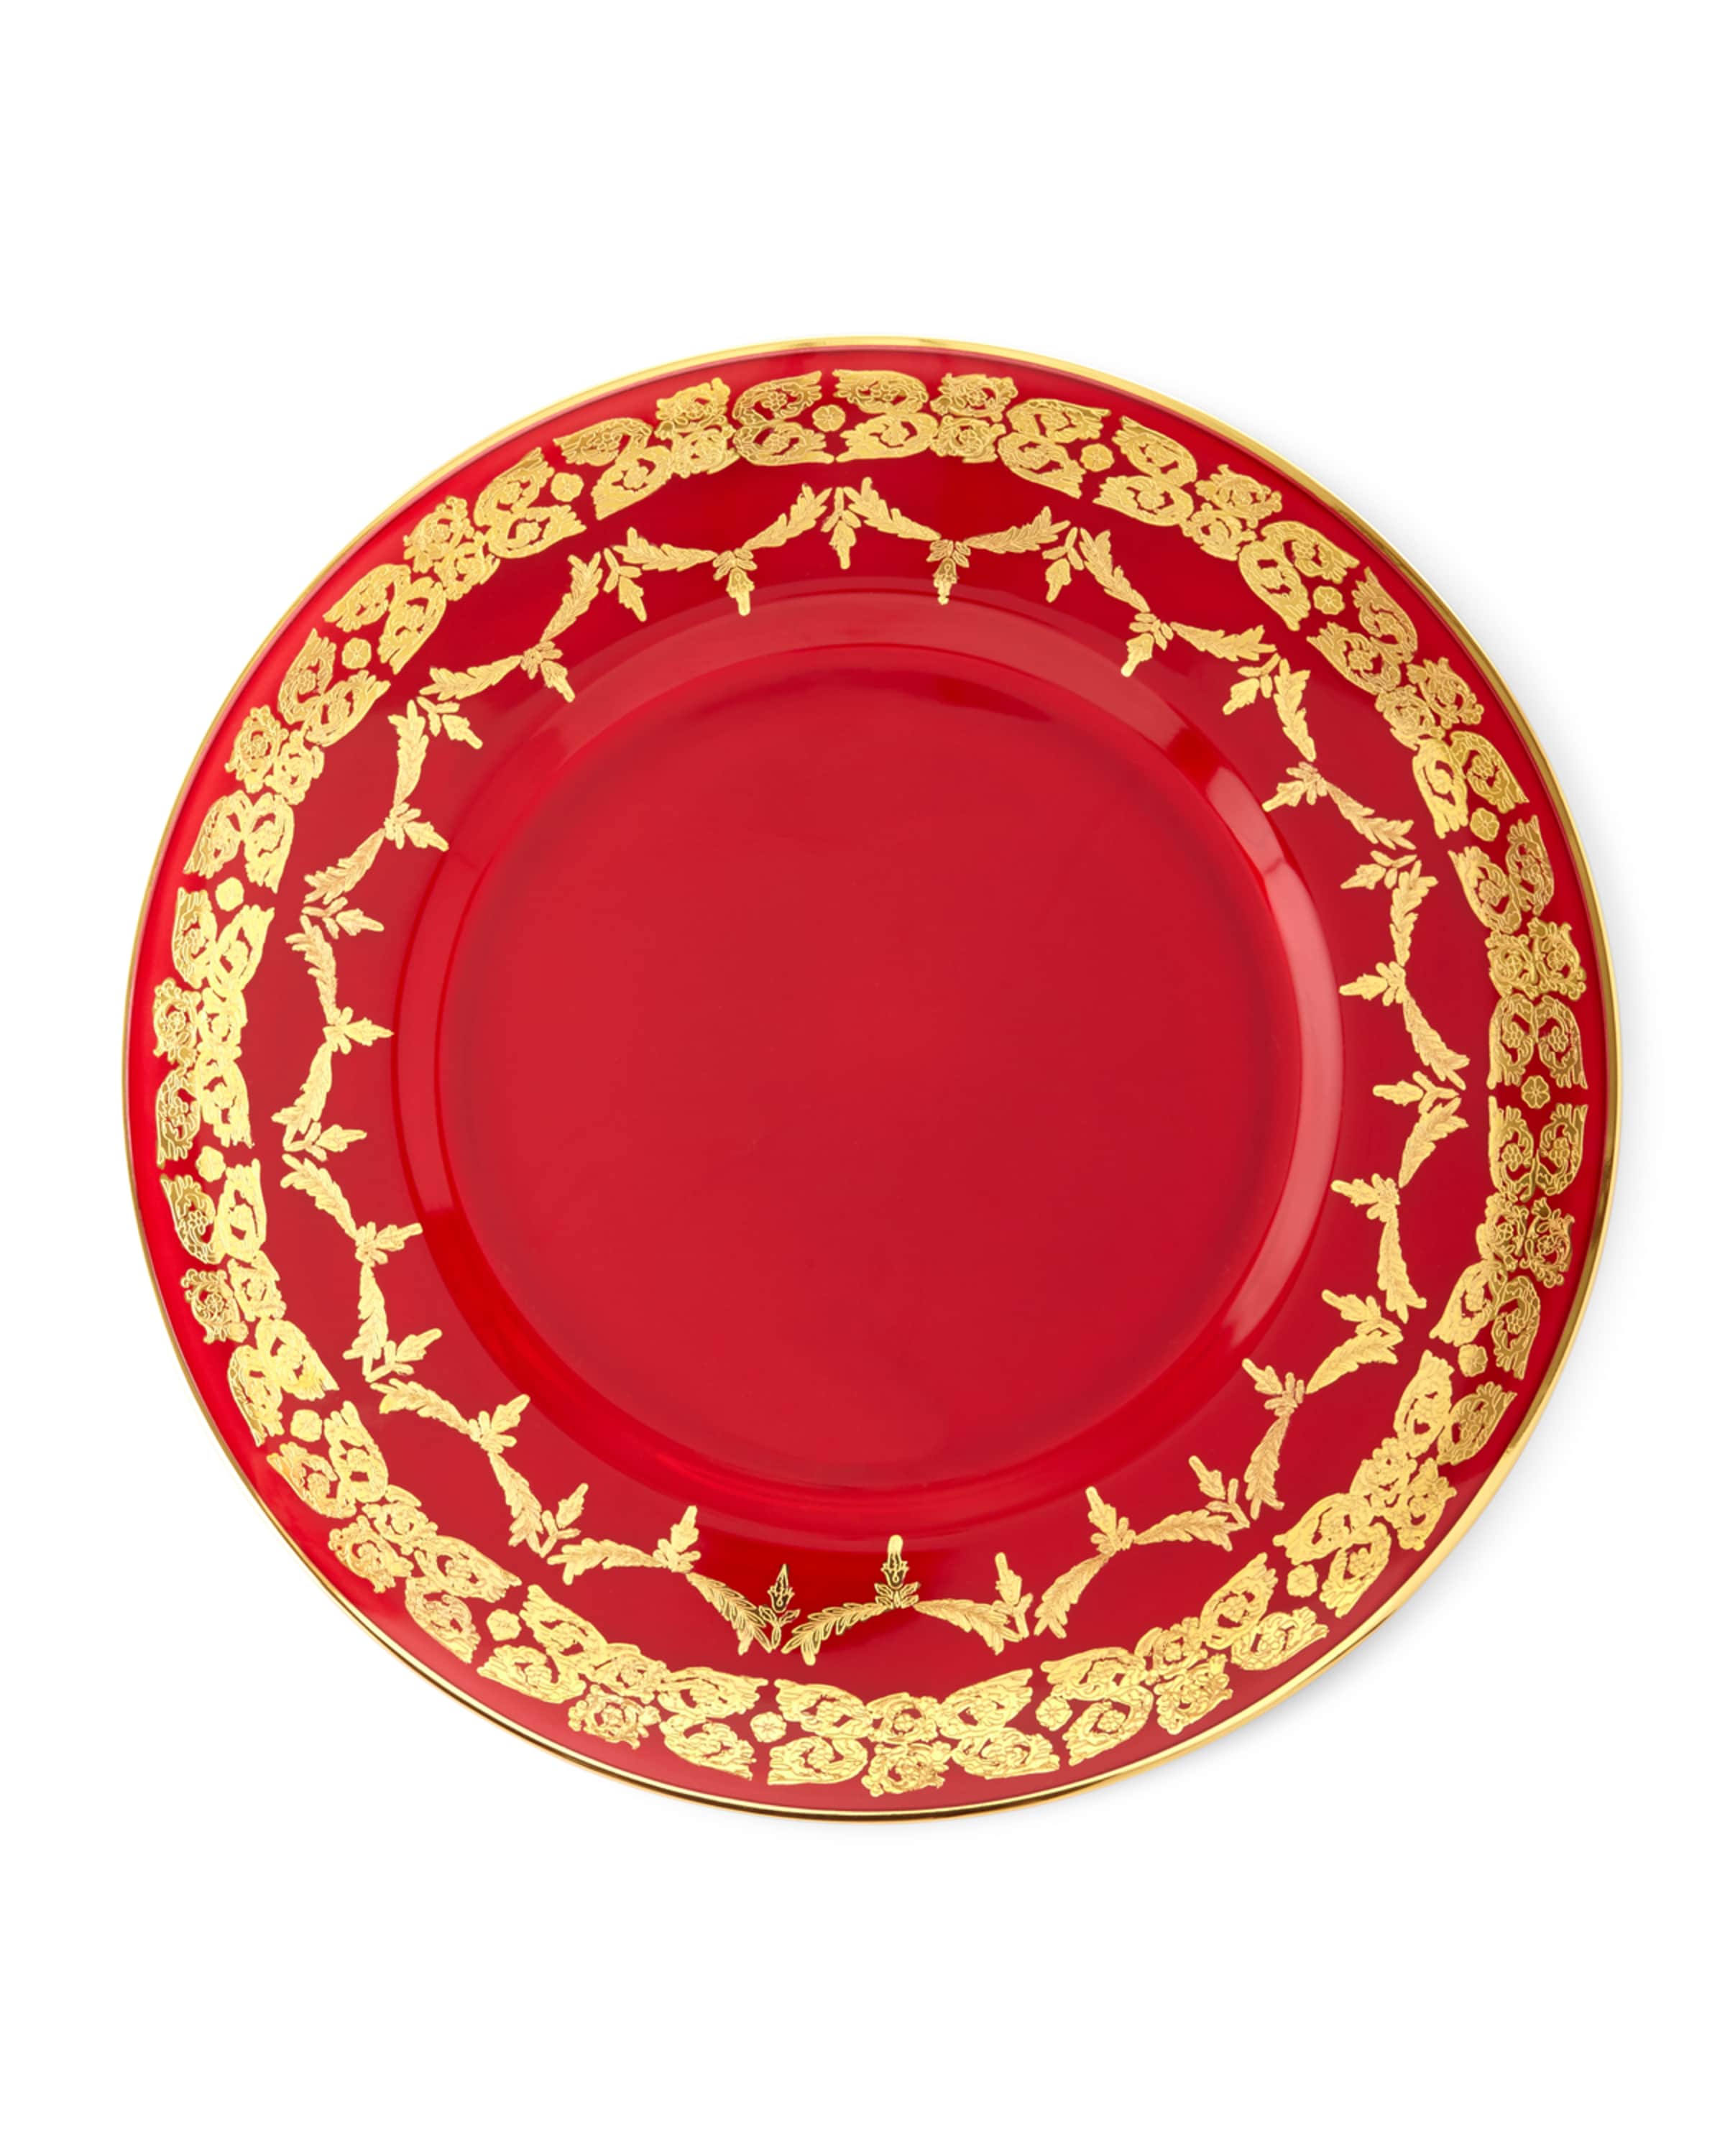 Neiman Marcus Red Oro Bello Charger, Set of 4